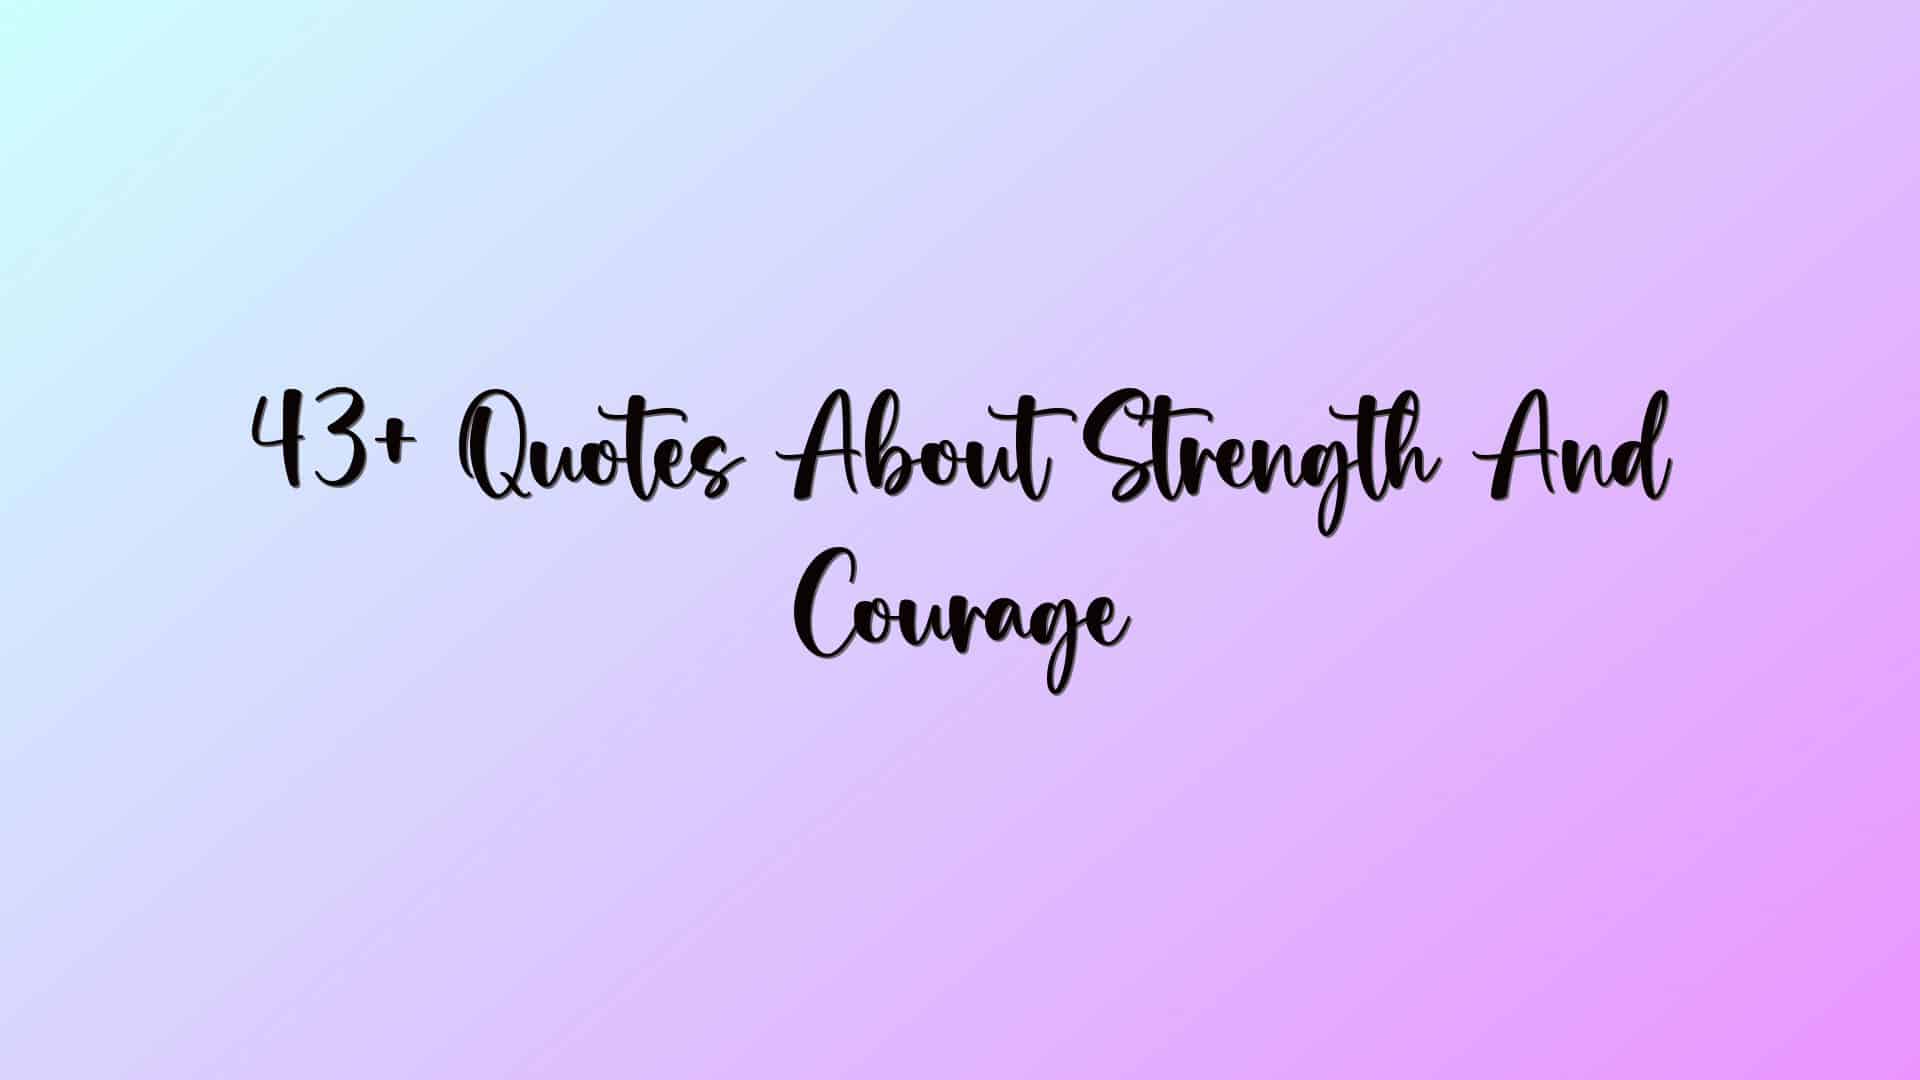 43+ Quotes About Strength And Courage